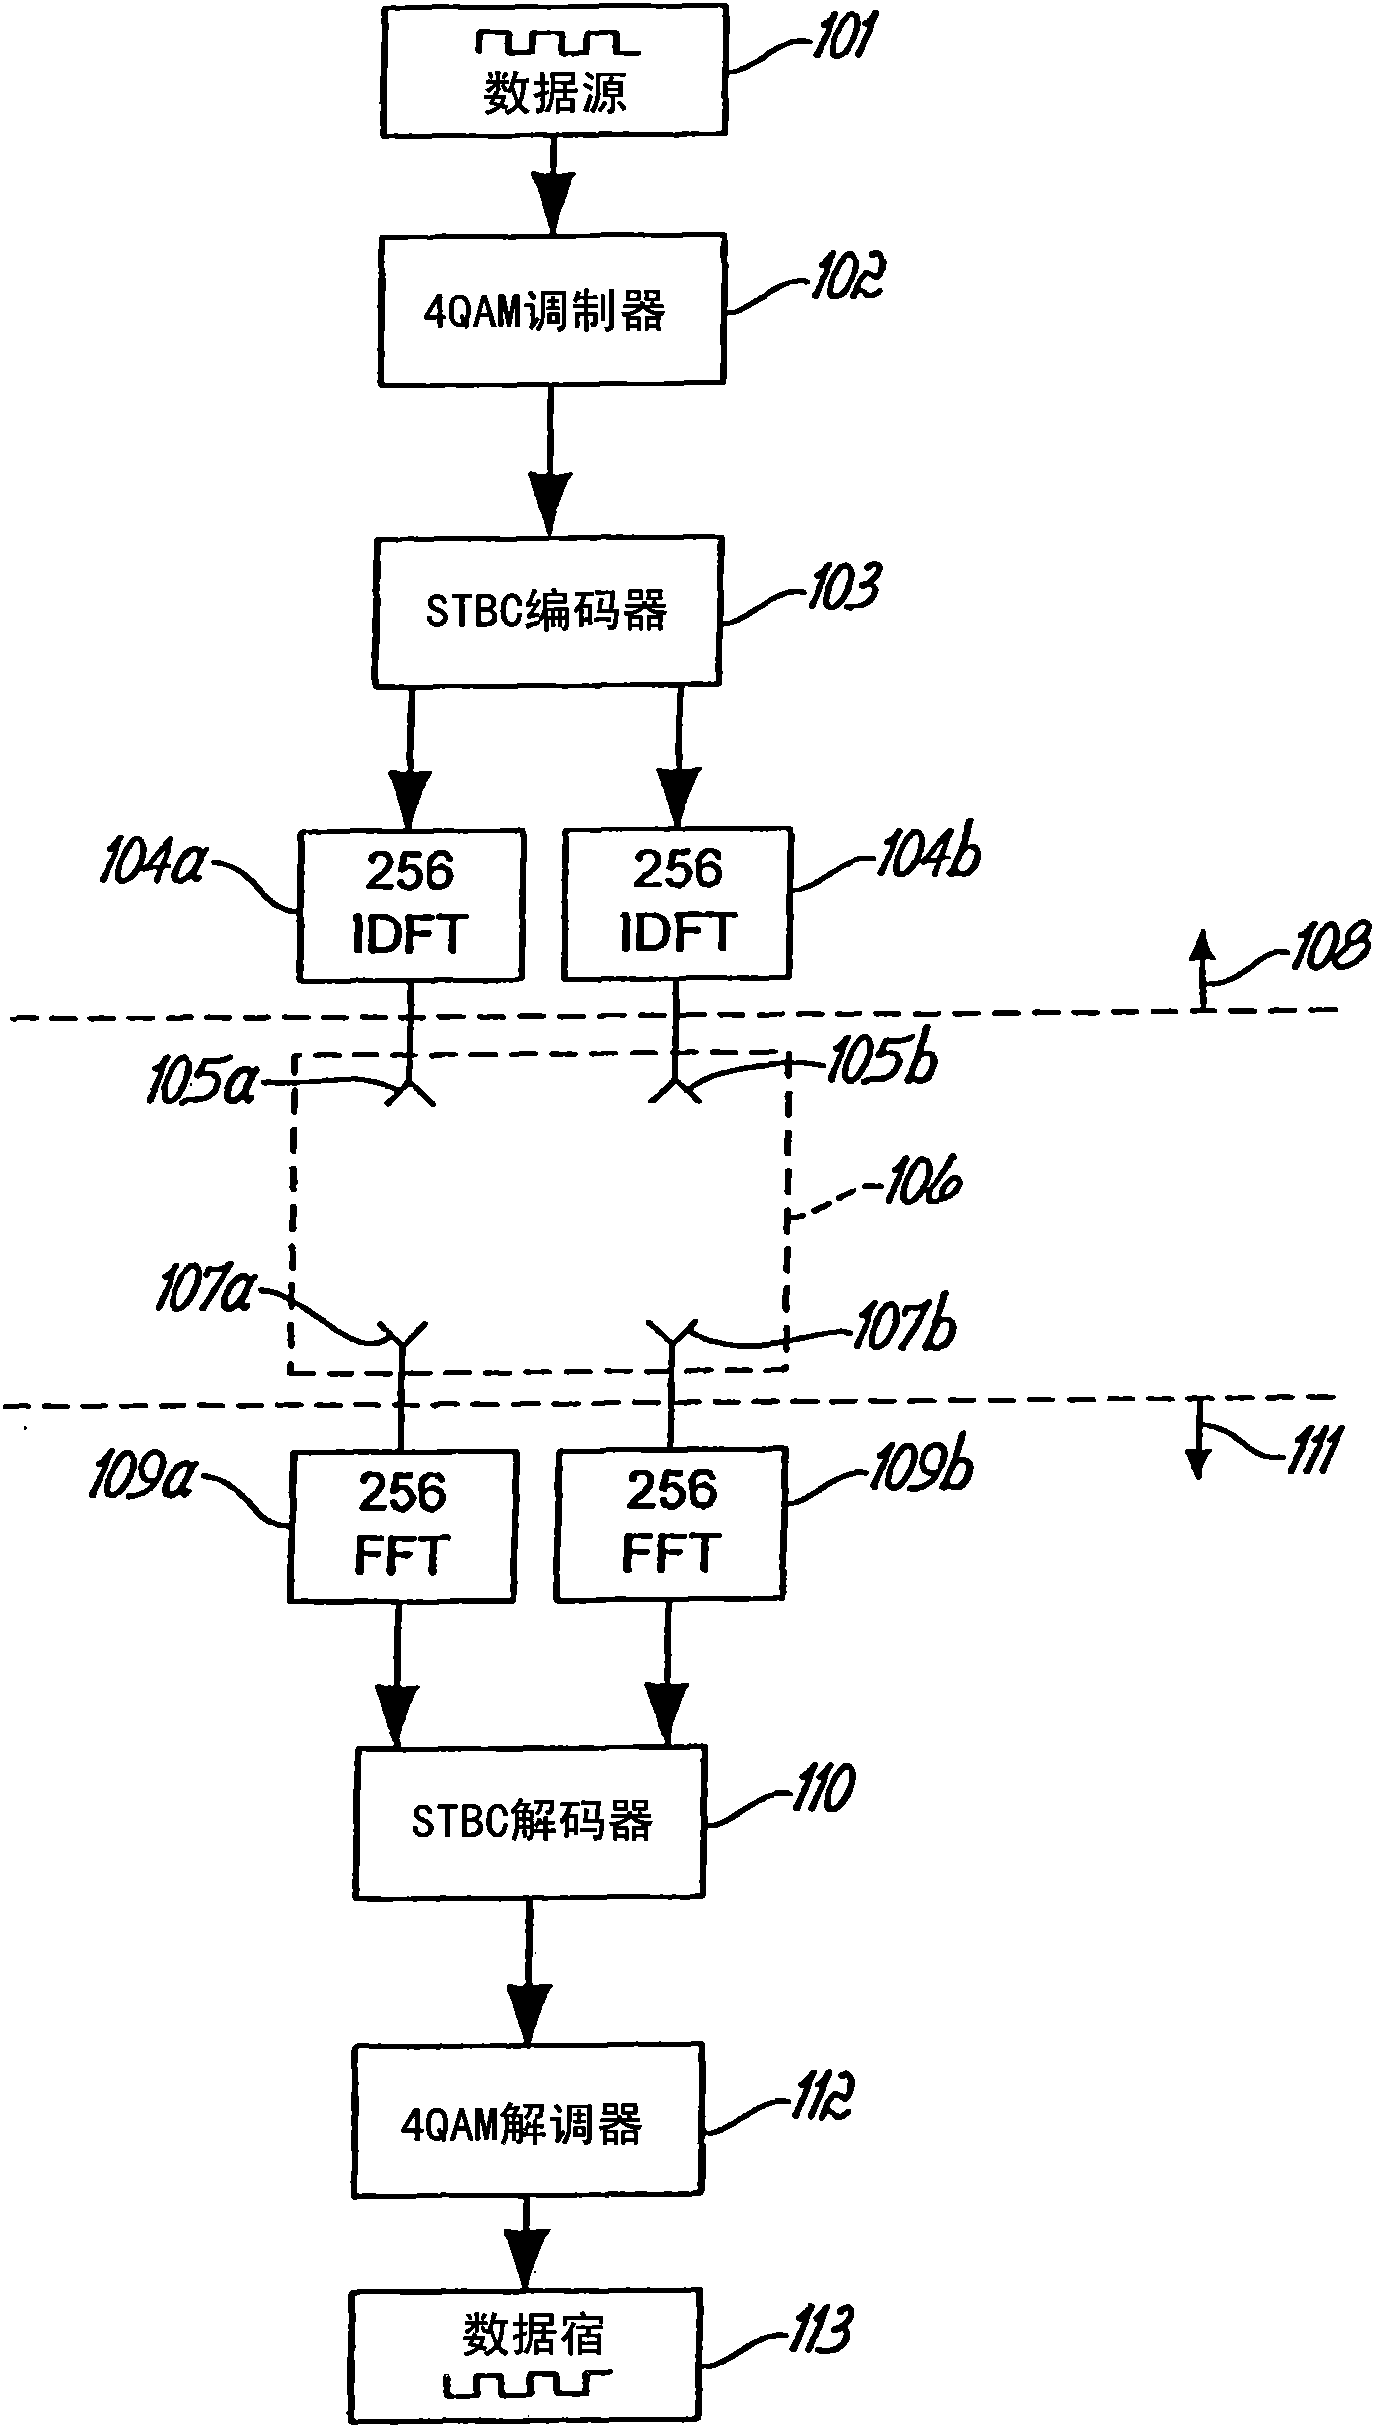 Single input single output repeater for relaying a multiple input multiple output signal